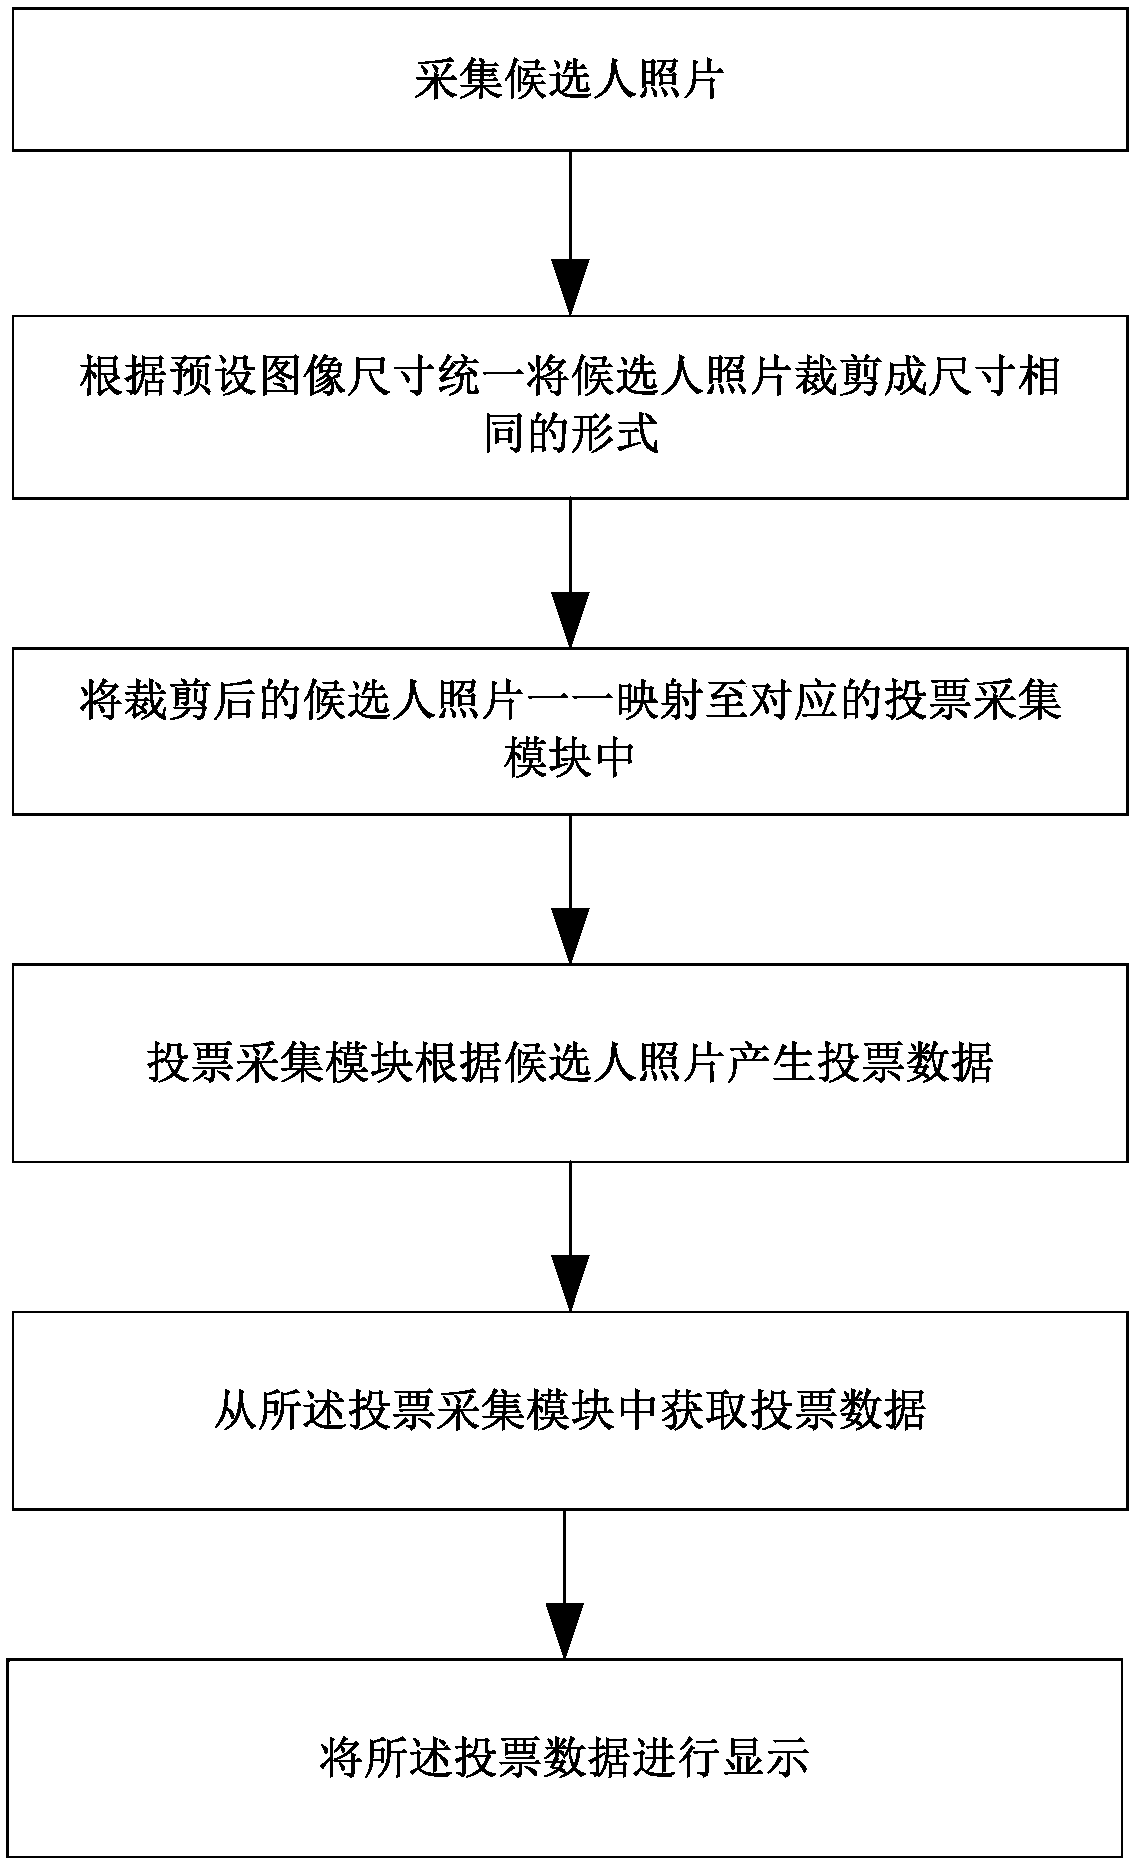 Voting information processing method and device